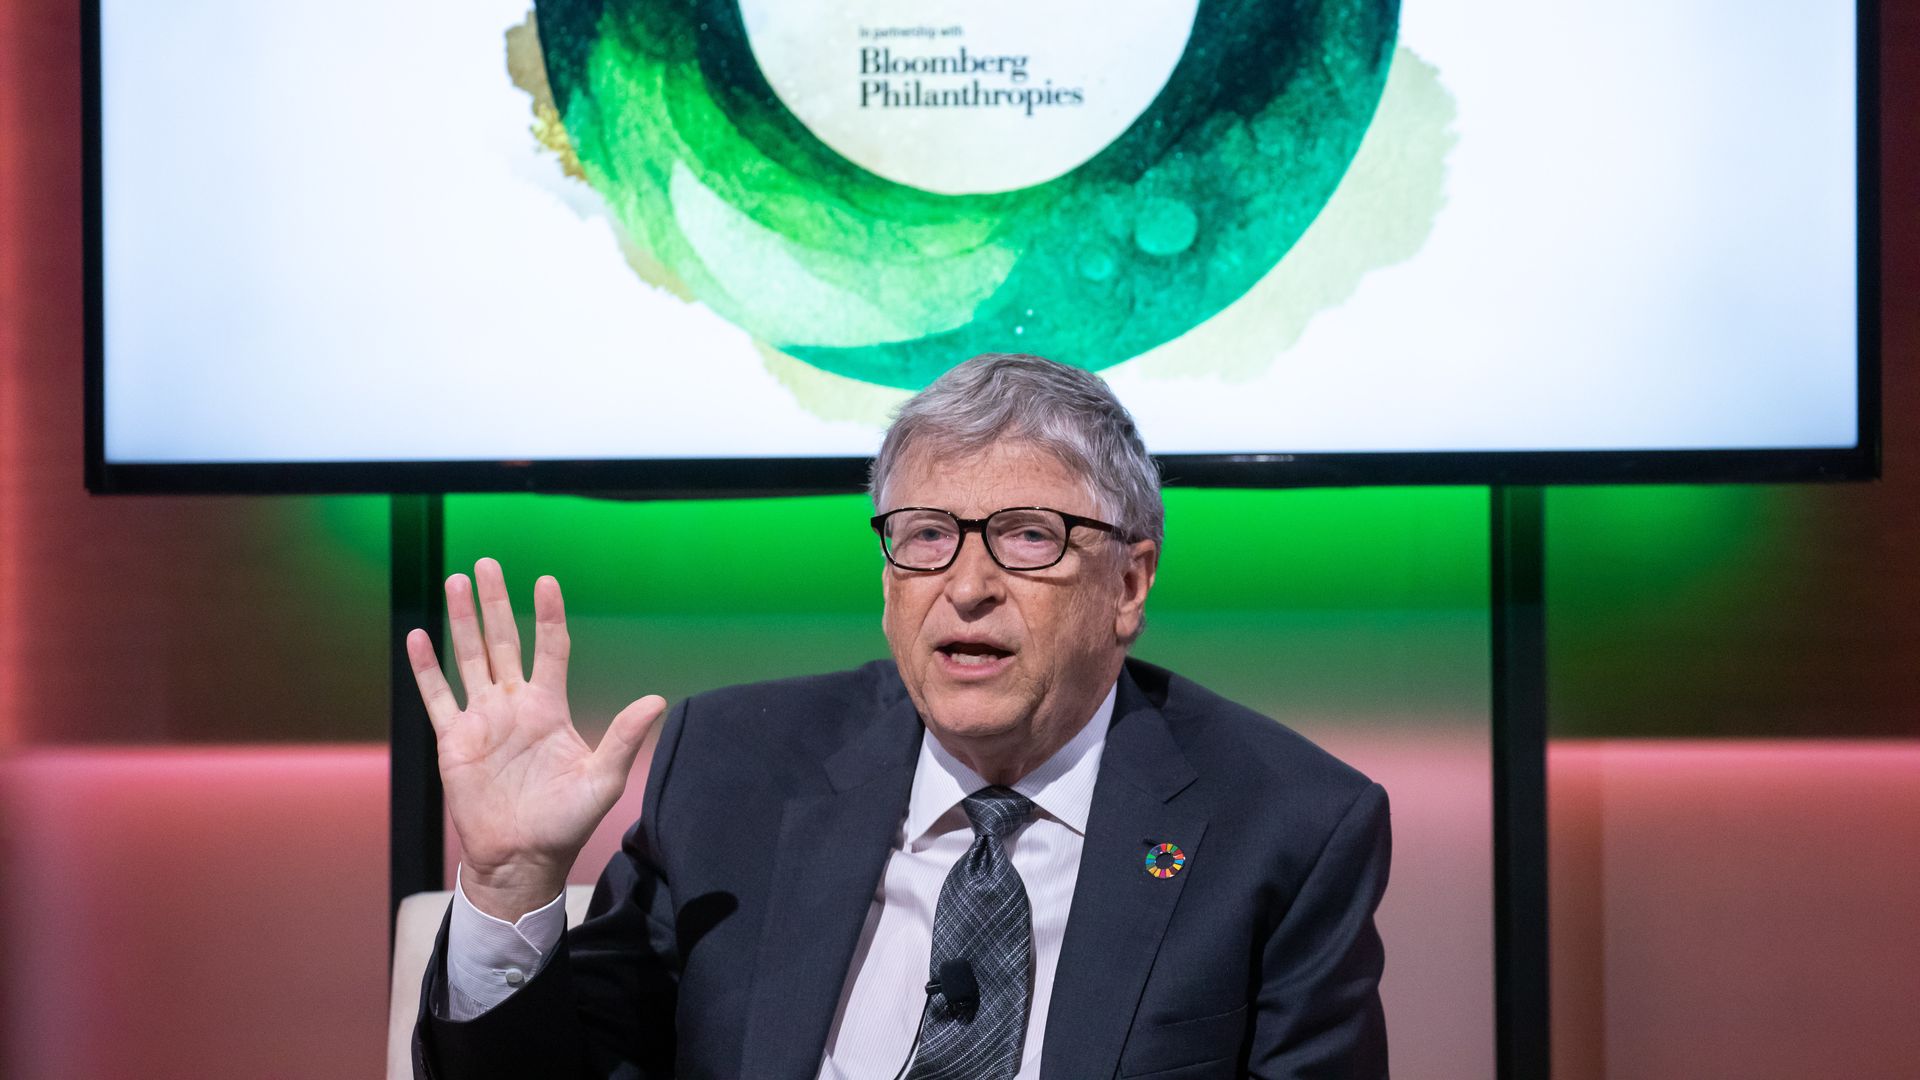 Bill Gates speaks at an event.